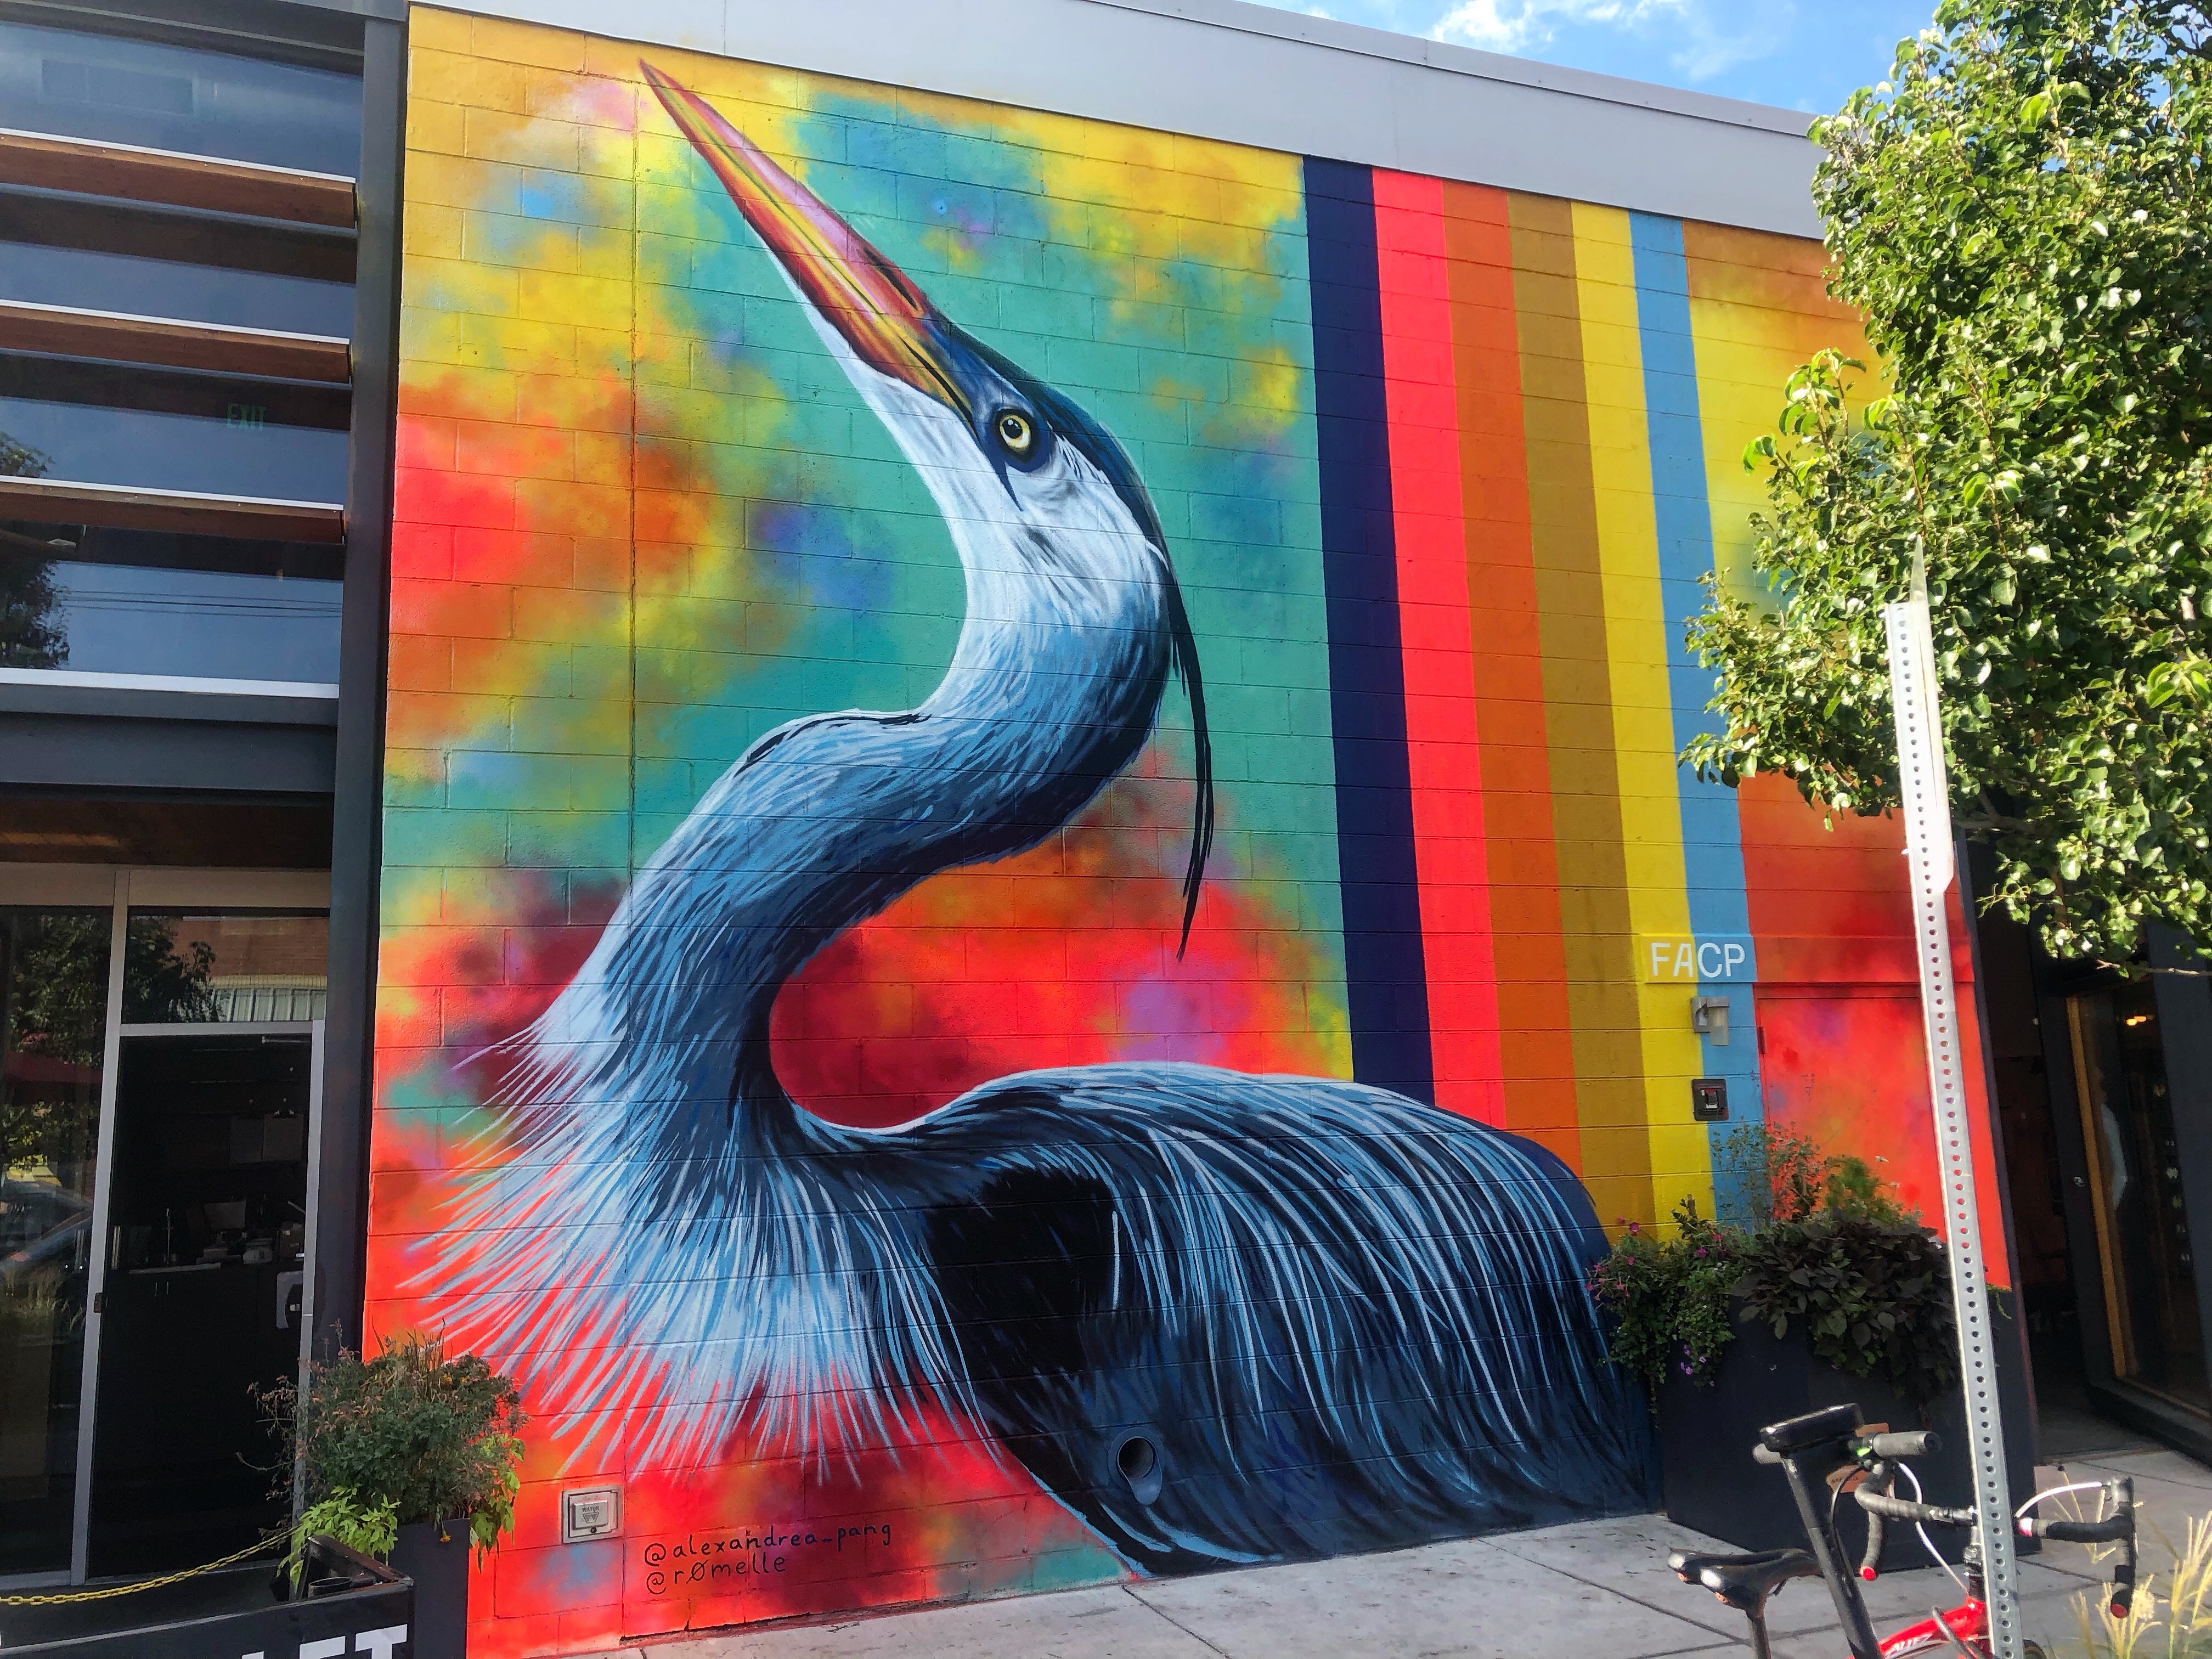 Colorful wall art with large bird looking up surrounded by many vibrant colors